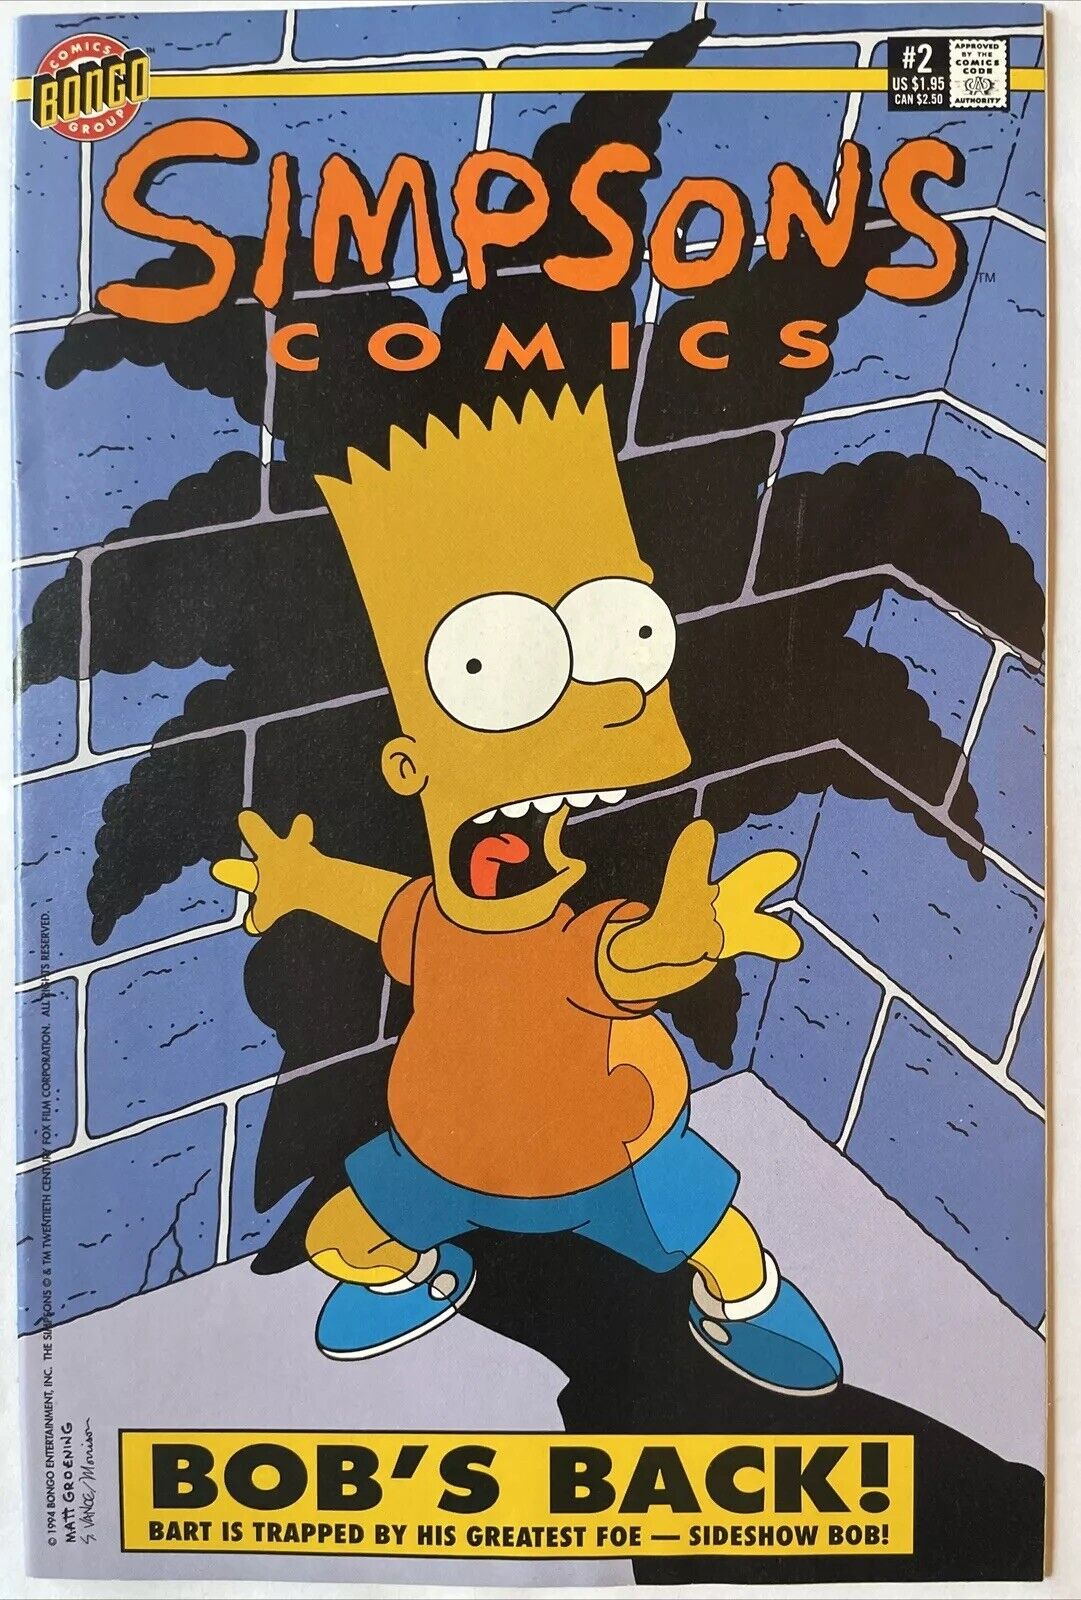 Simpsons Comics #2 • Bart Simpson Cover! Dual Covers